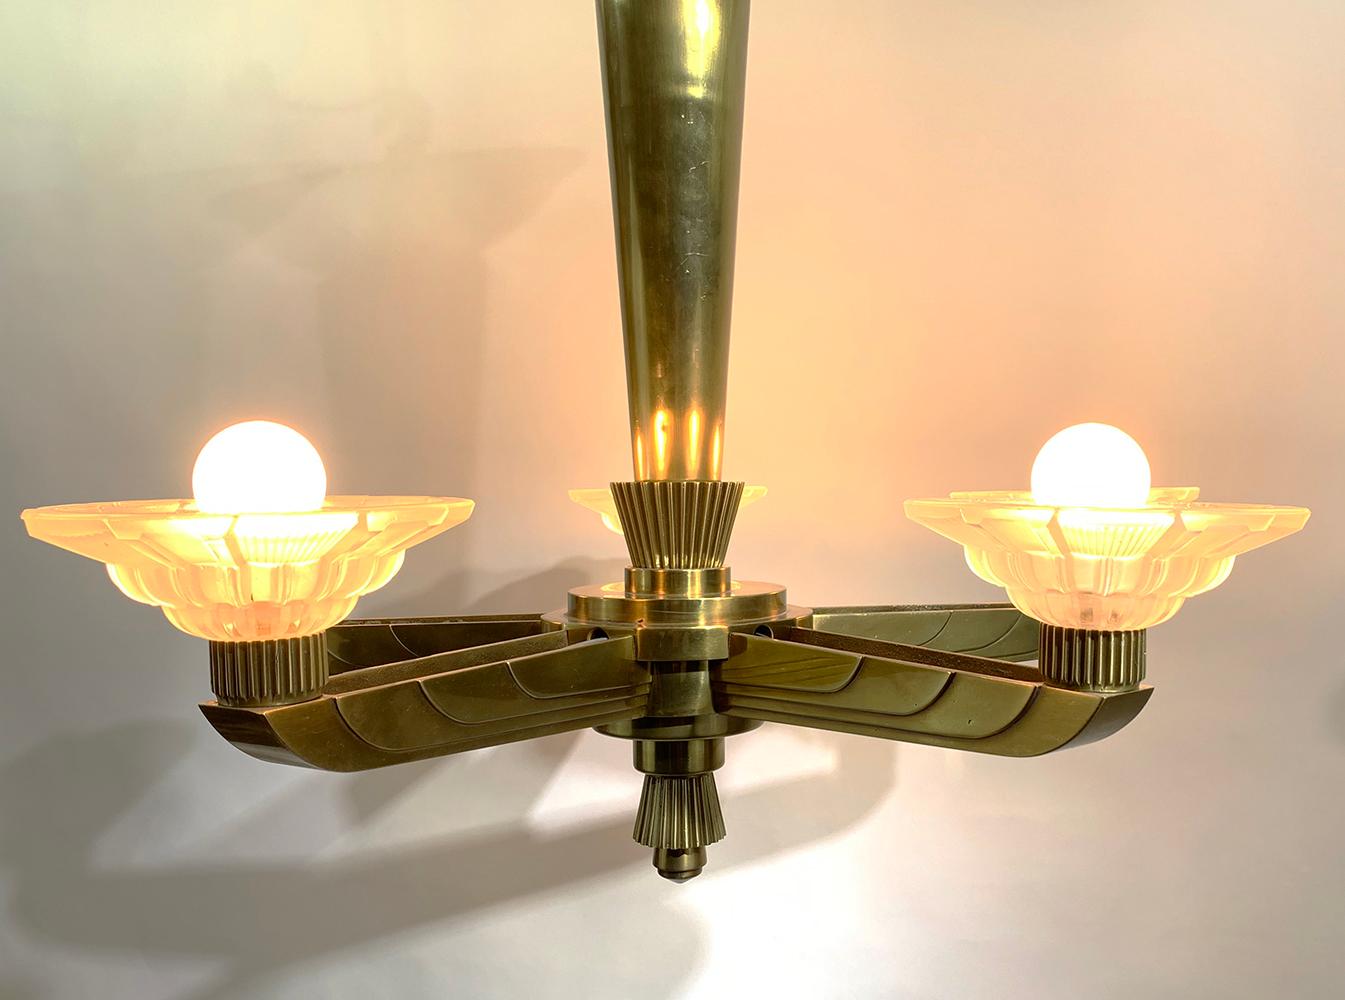 Exceptional Hettier & Vincent French Art Deco Chandelier, Circa 1930 In Good Condition For Sale In Beirut, LB